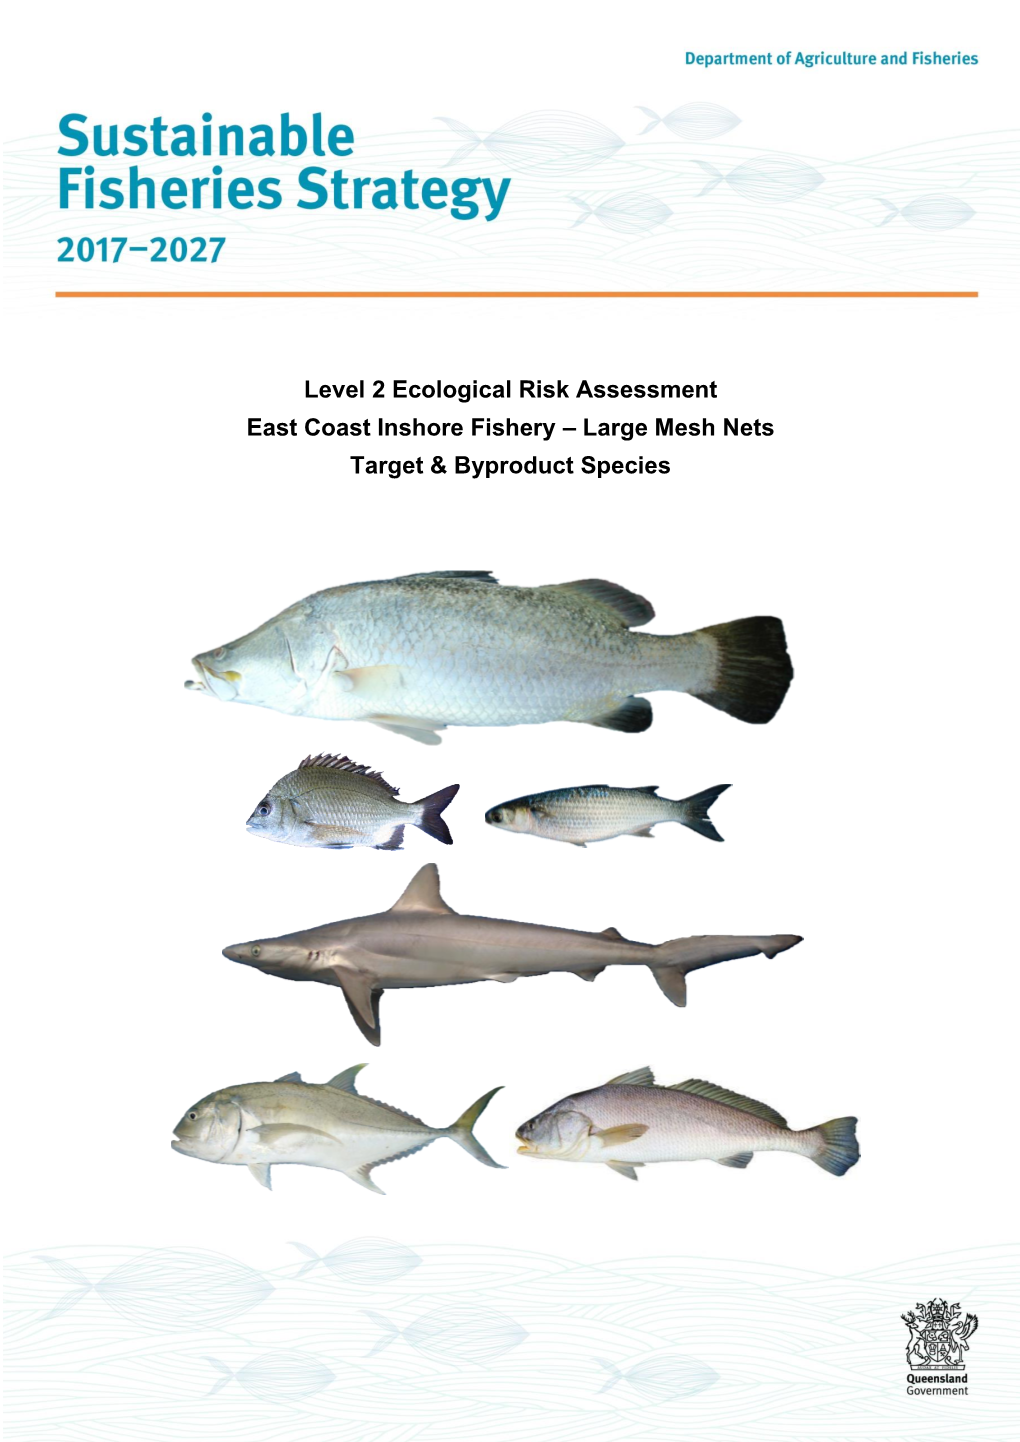 Level 2 Ecological Risk Assessment East Coast Inshore Fishery – Large Mesh Nets Target & Byproduct Species